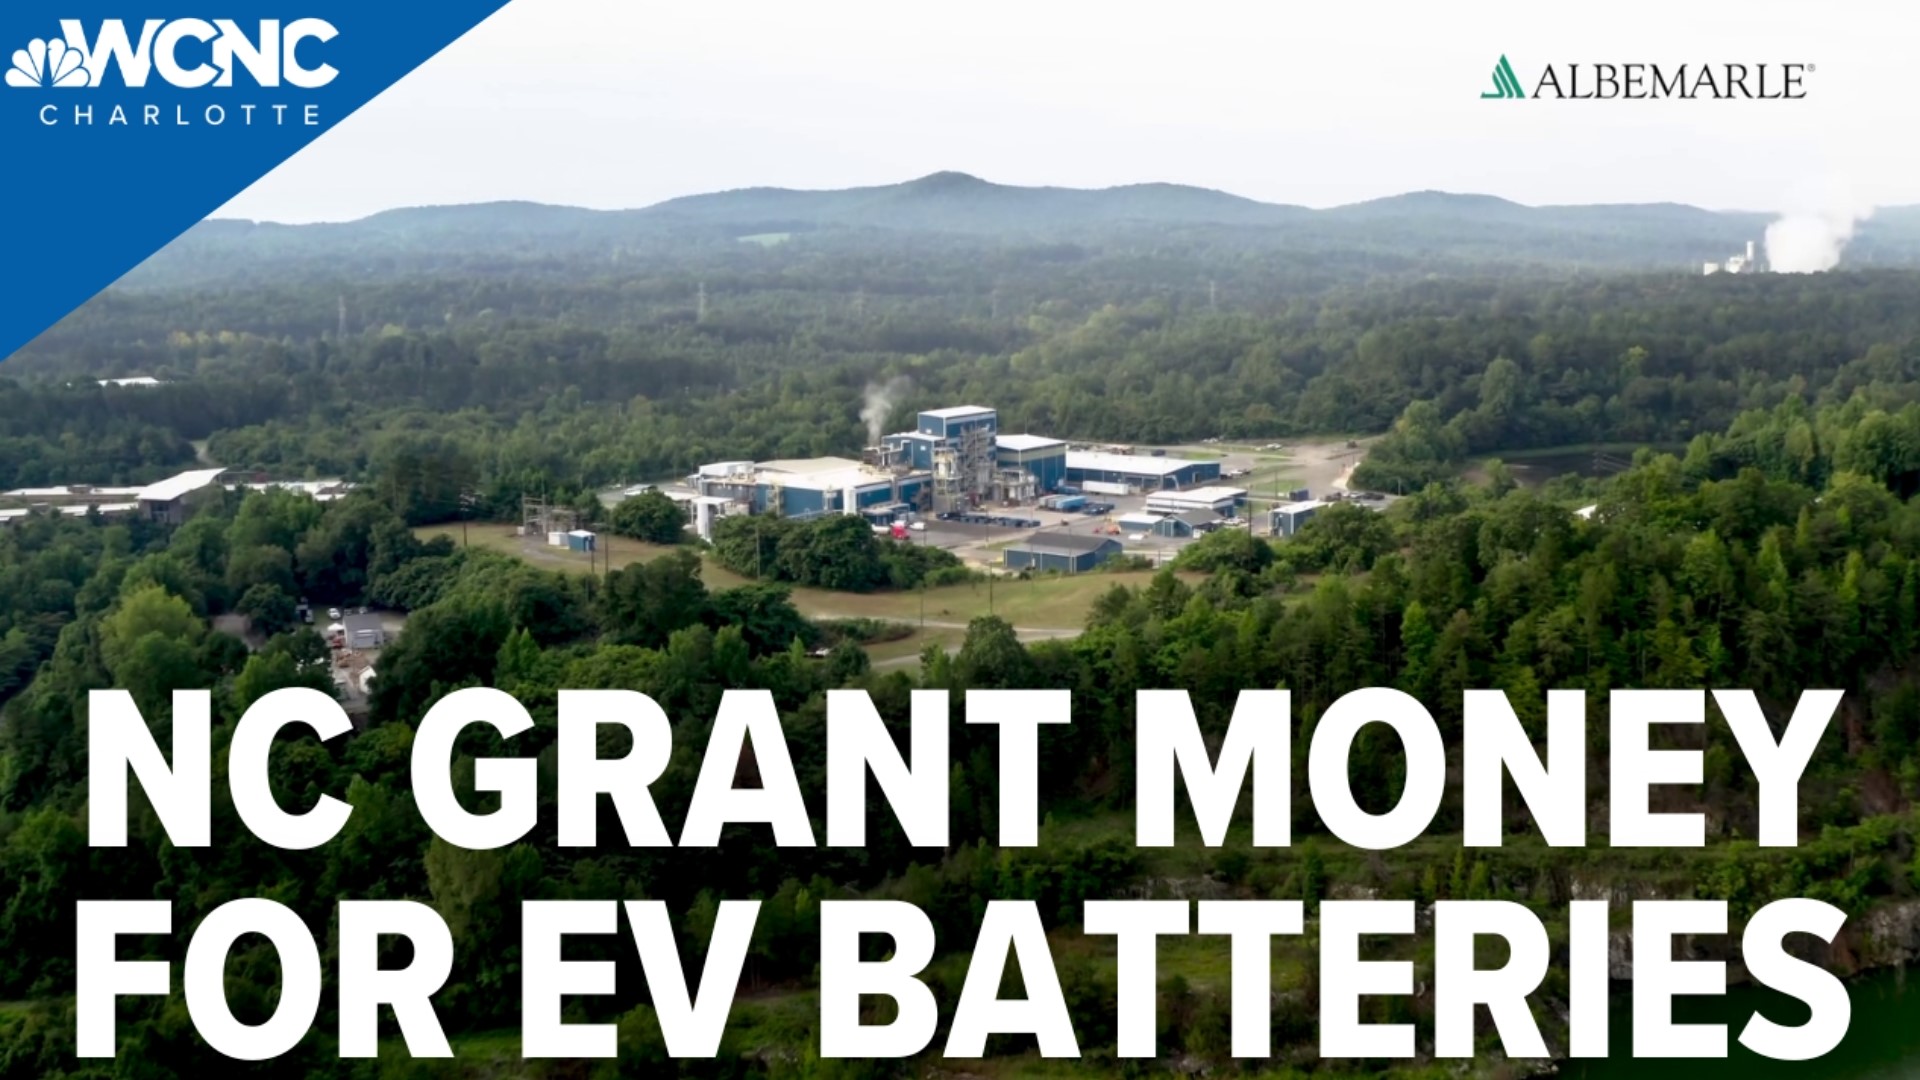 Albemarle will build a new Lithium facility at its Kings Mountain Location, which should lead to 200 jobs.